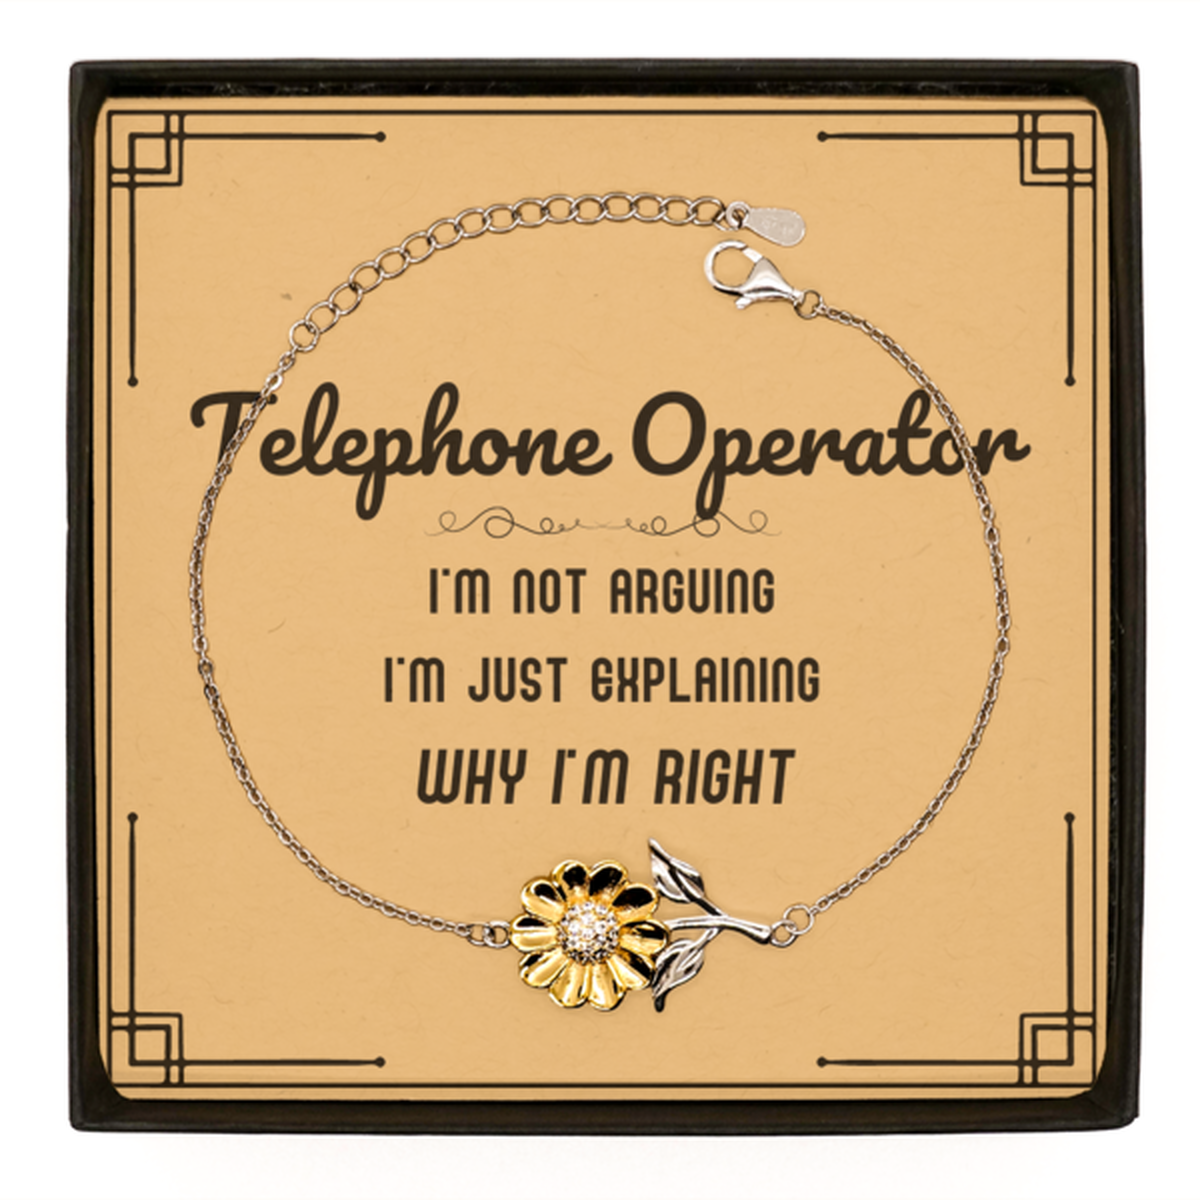 Telephone Operator I'm not Arguing. I'm Just Explaining Why I'm RIGHT Sunflower Bracelet, Funny Saying Quote Telephone Operator Gifts For Telephone Operator Message Card Graduation Birthday Christmas Gifts for Men Women Coworker